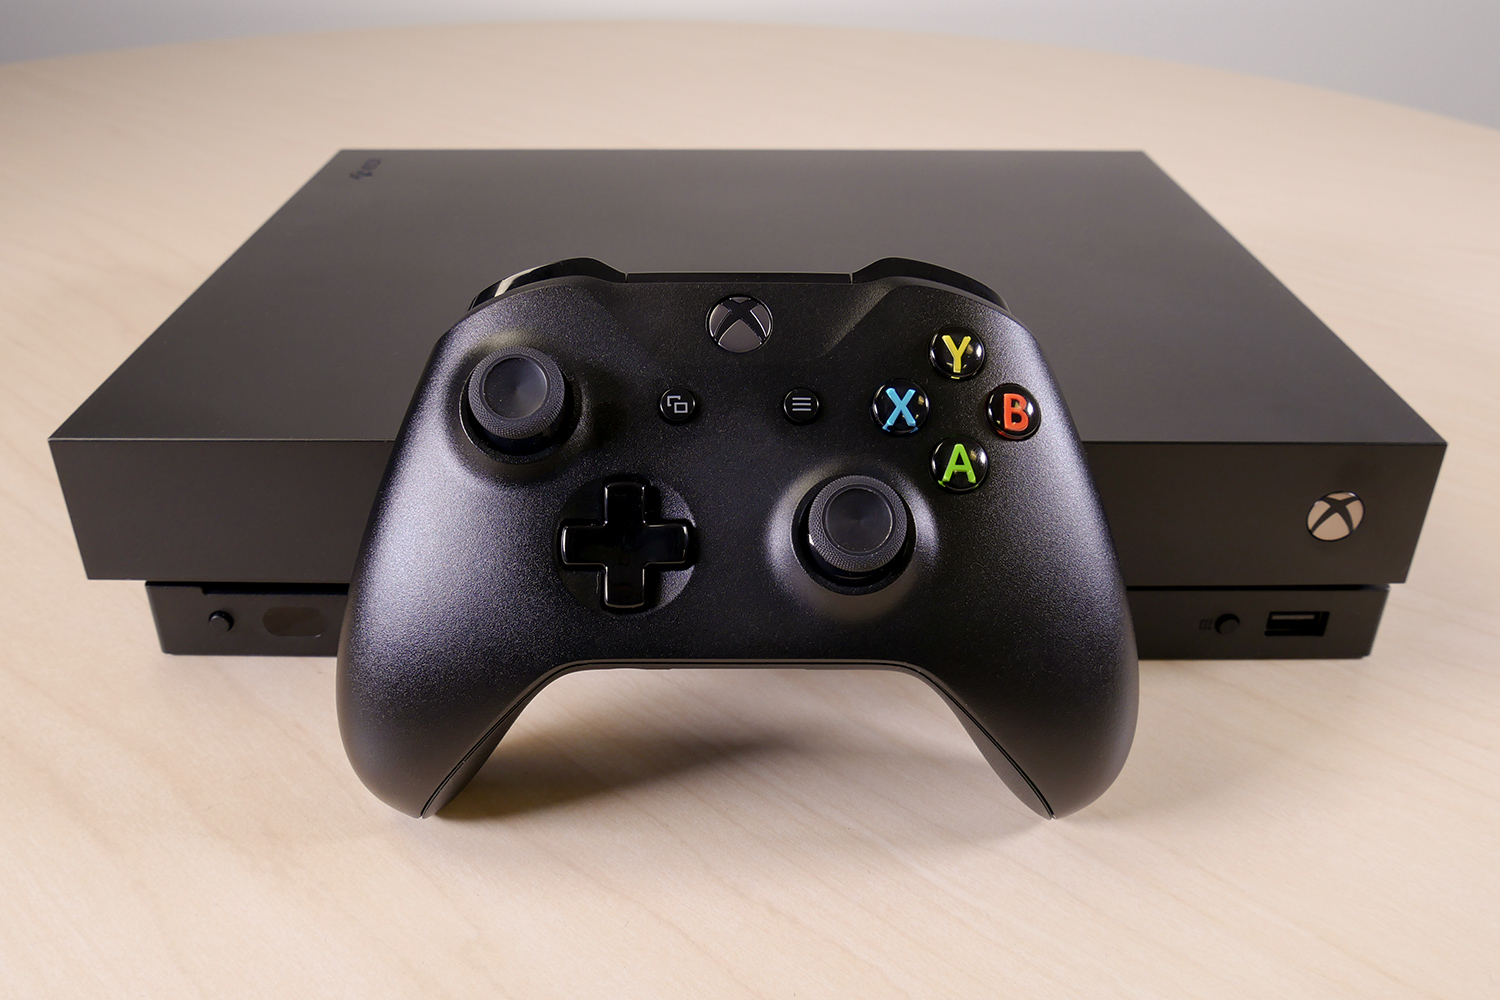 comfortable gloss Amphibious Xbox One X Review 2020: The Most Powerful Console | Digital Trends